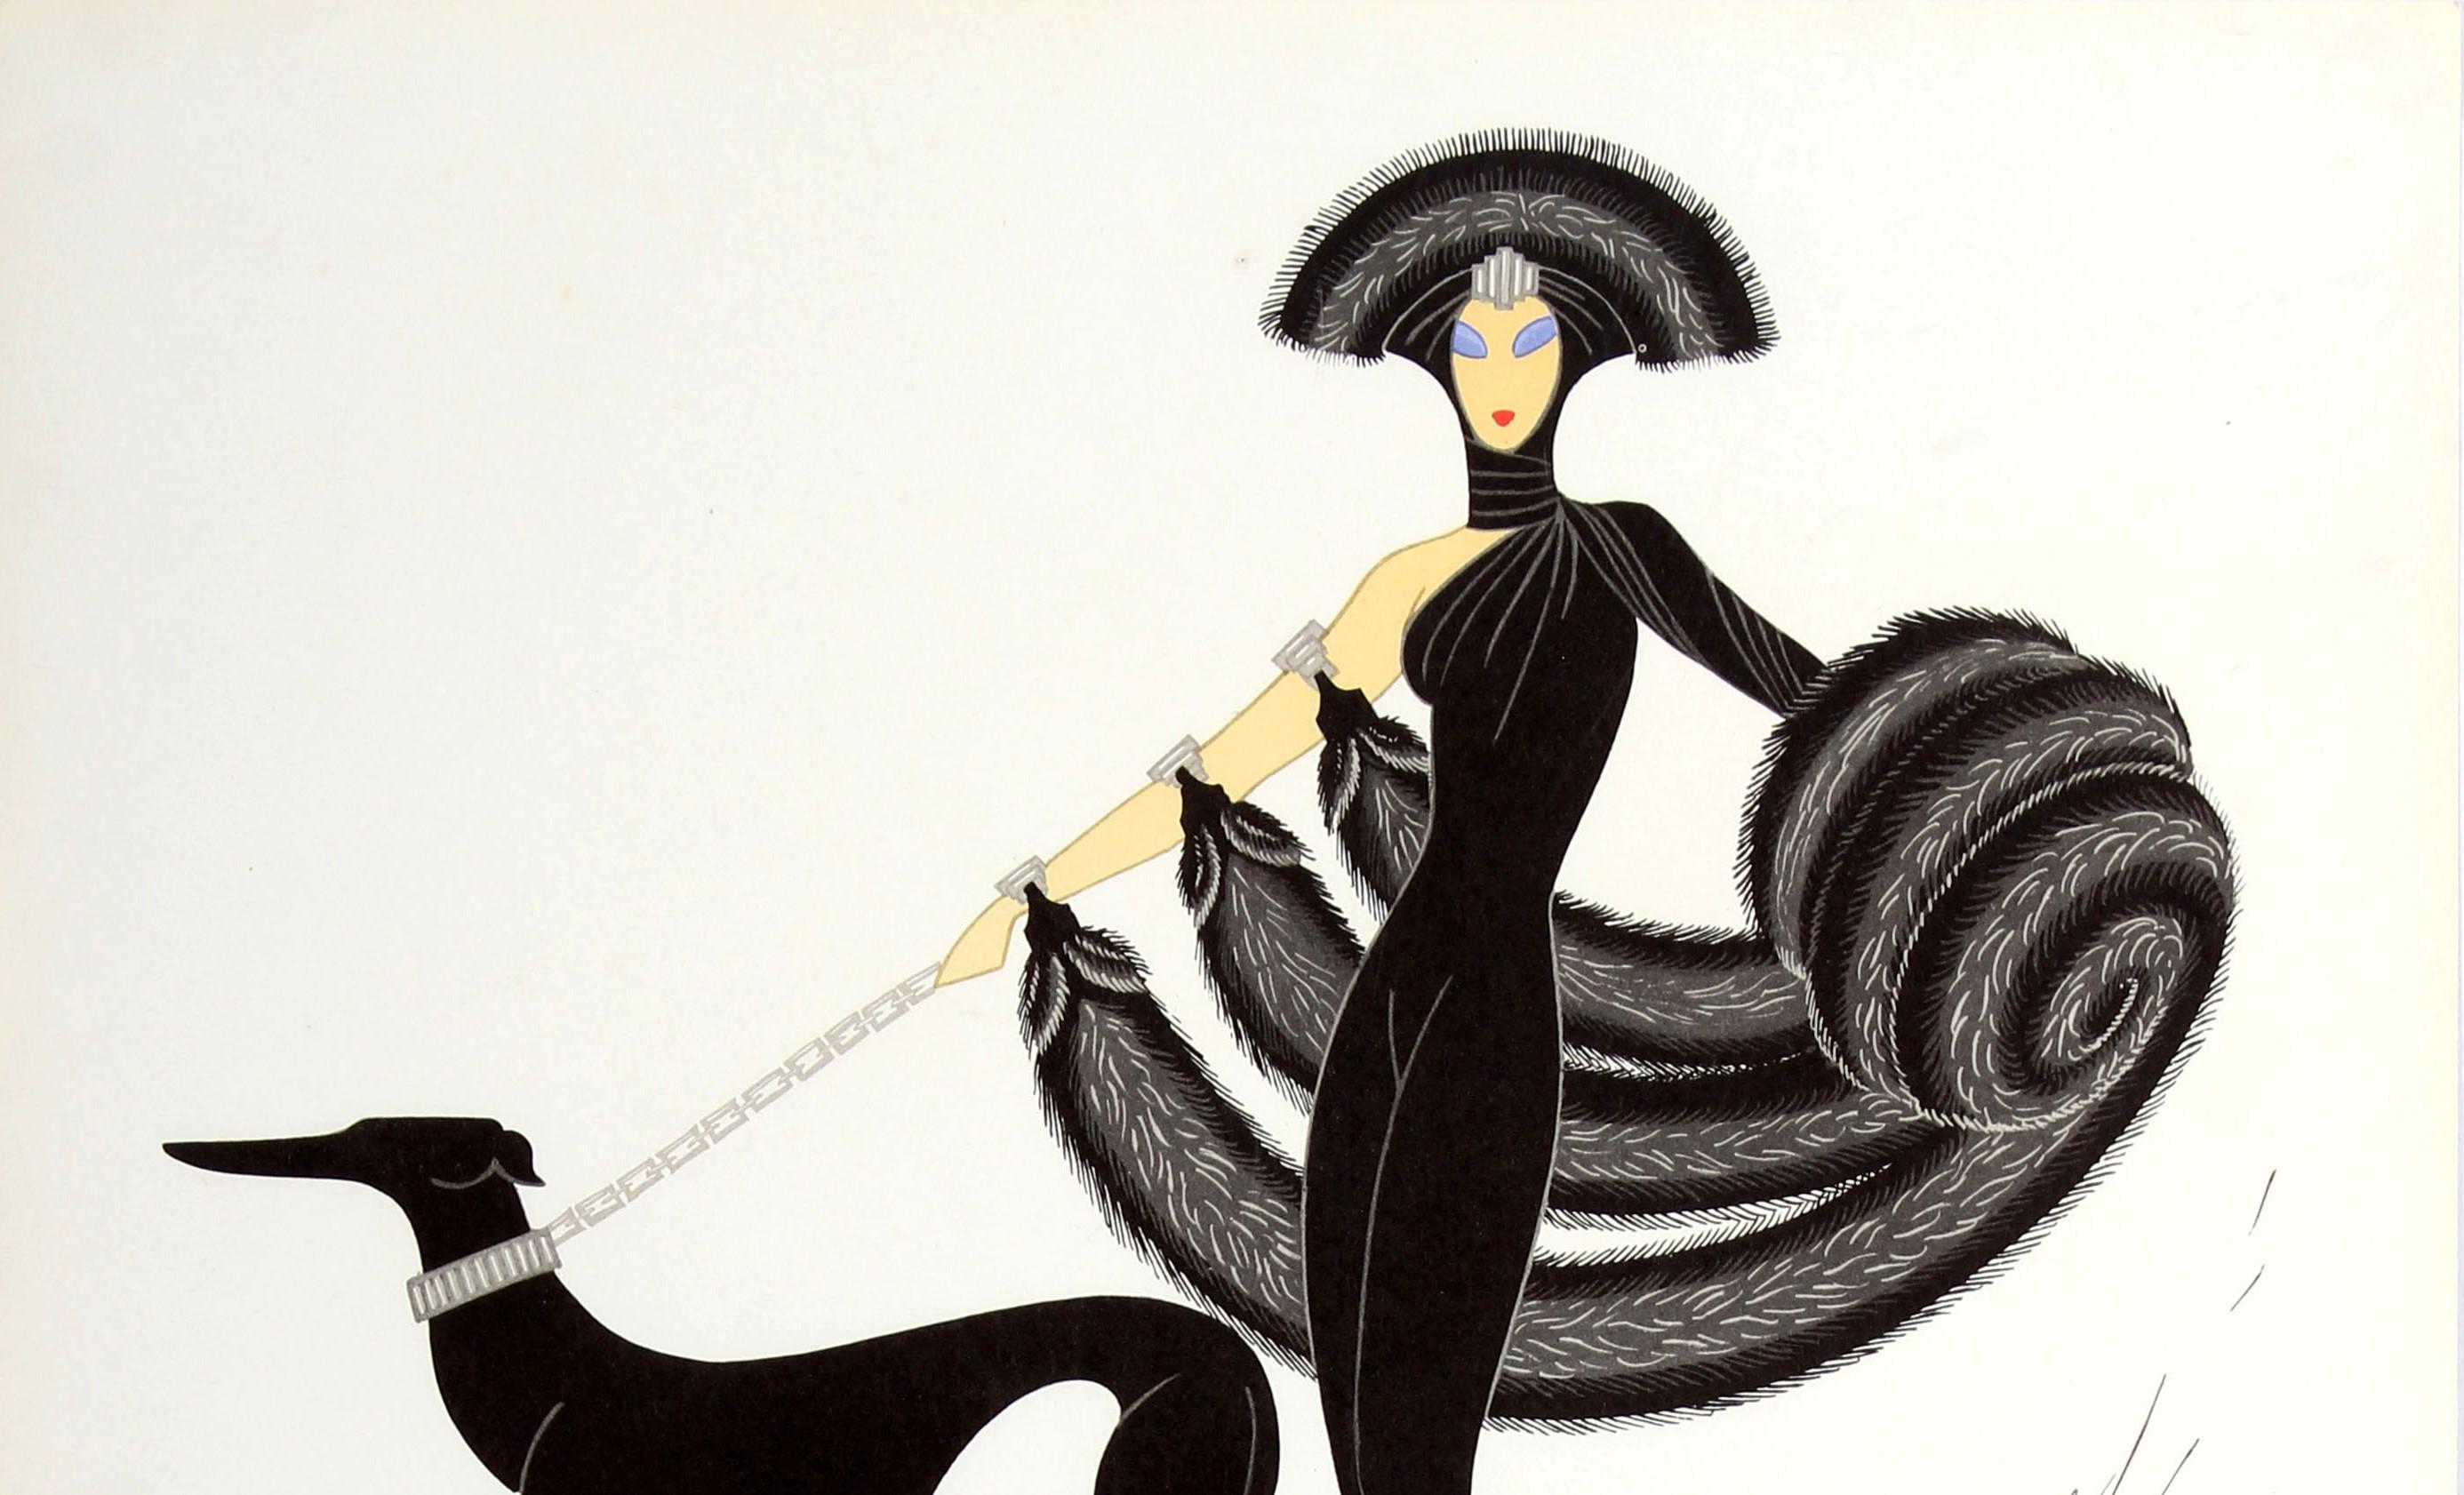 Original vintage exhibition poster advertising a show by the notable artist and designer Erte (Romain de Tirtoff Erte; 1892-1990) at the Galerie Proscenium 35 Rue de Seine Paris in November and December featuring a classic Art Deco style costume